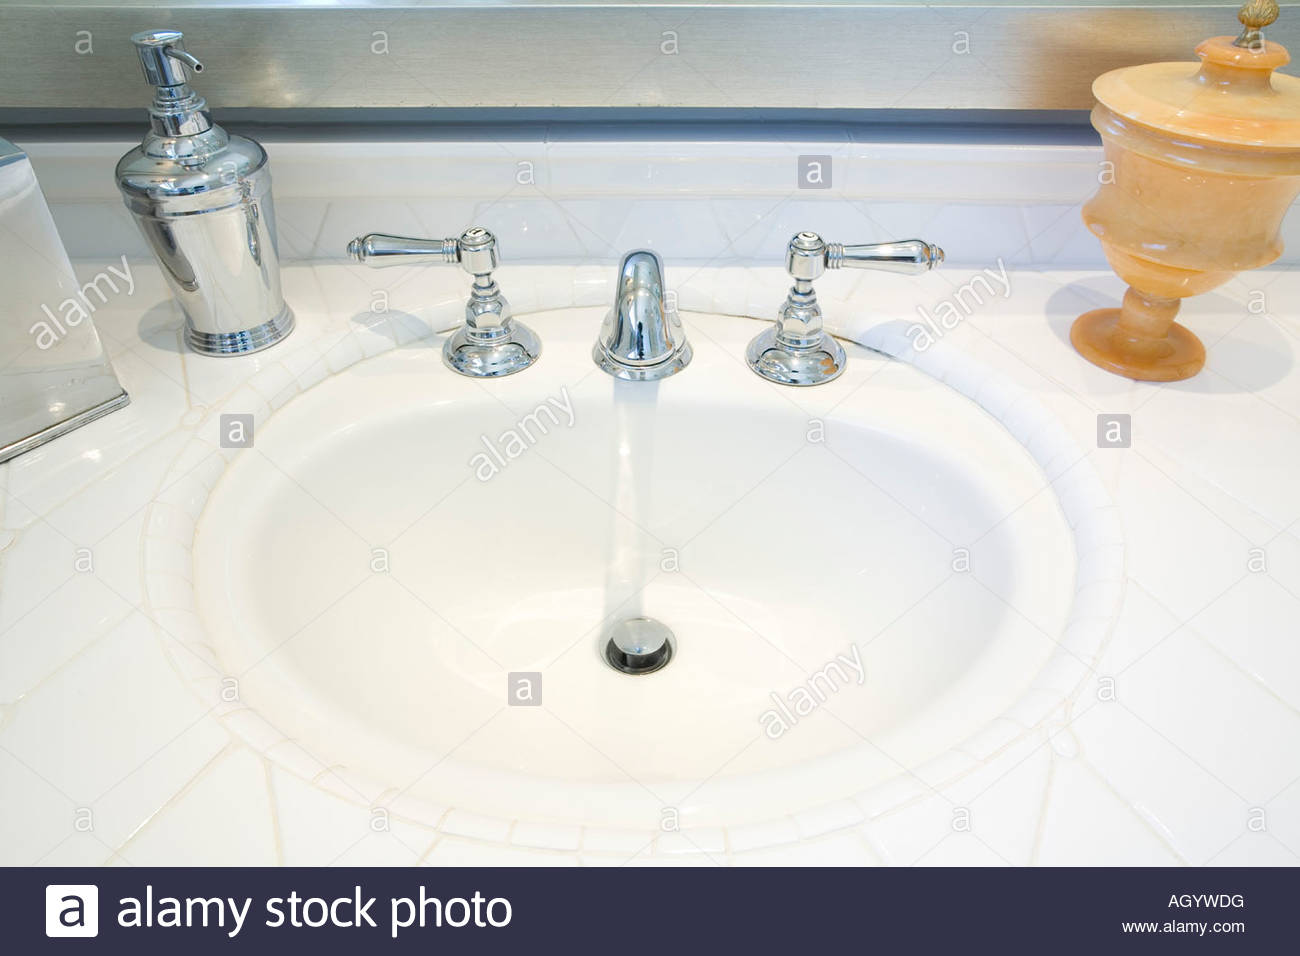 Clean Bathroom Sink With Water Running Stock Photo 14311851